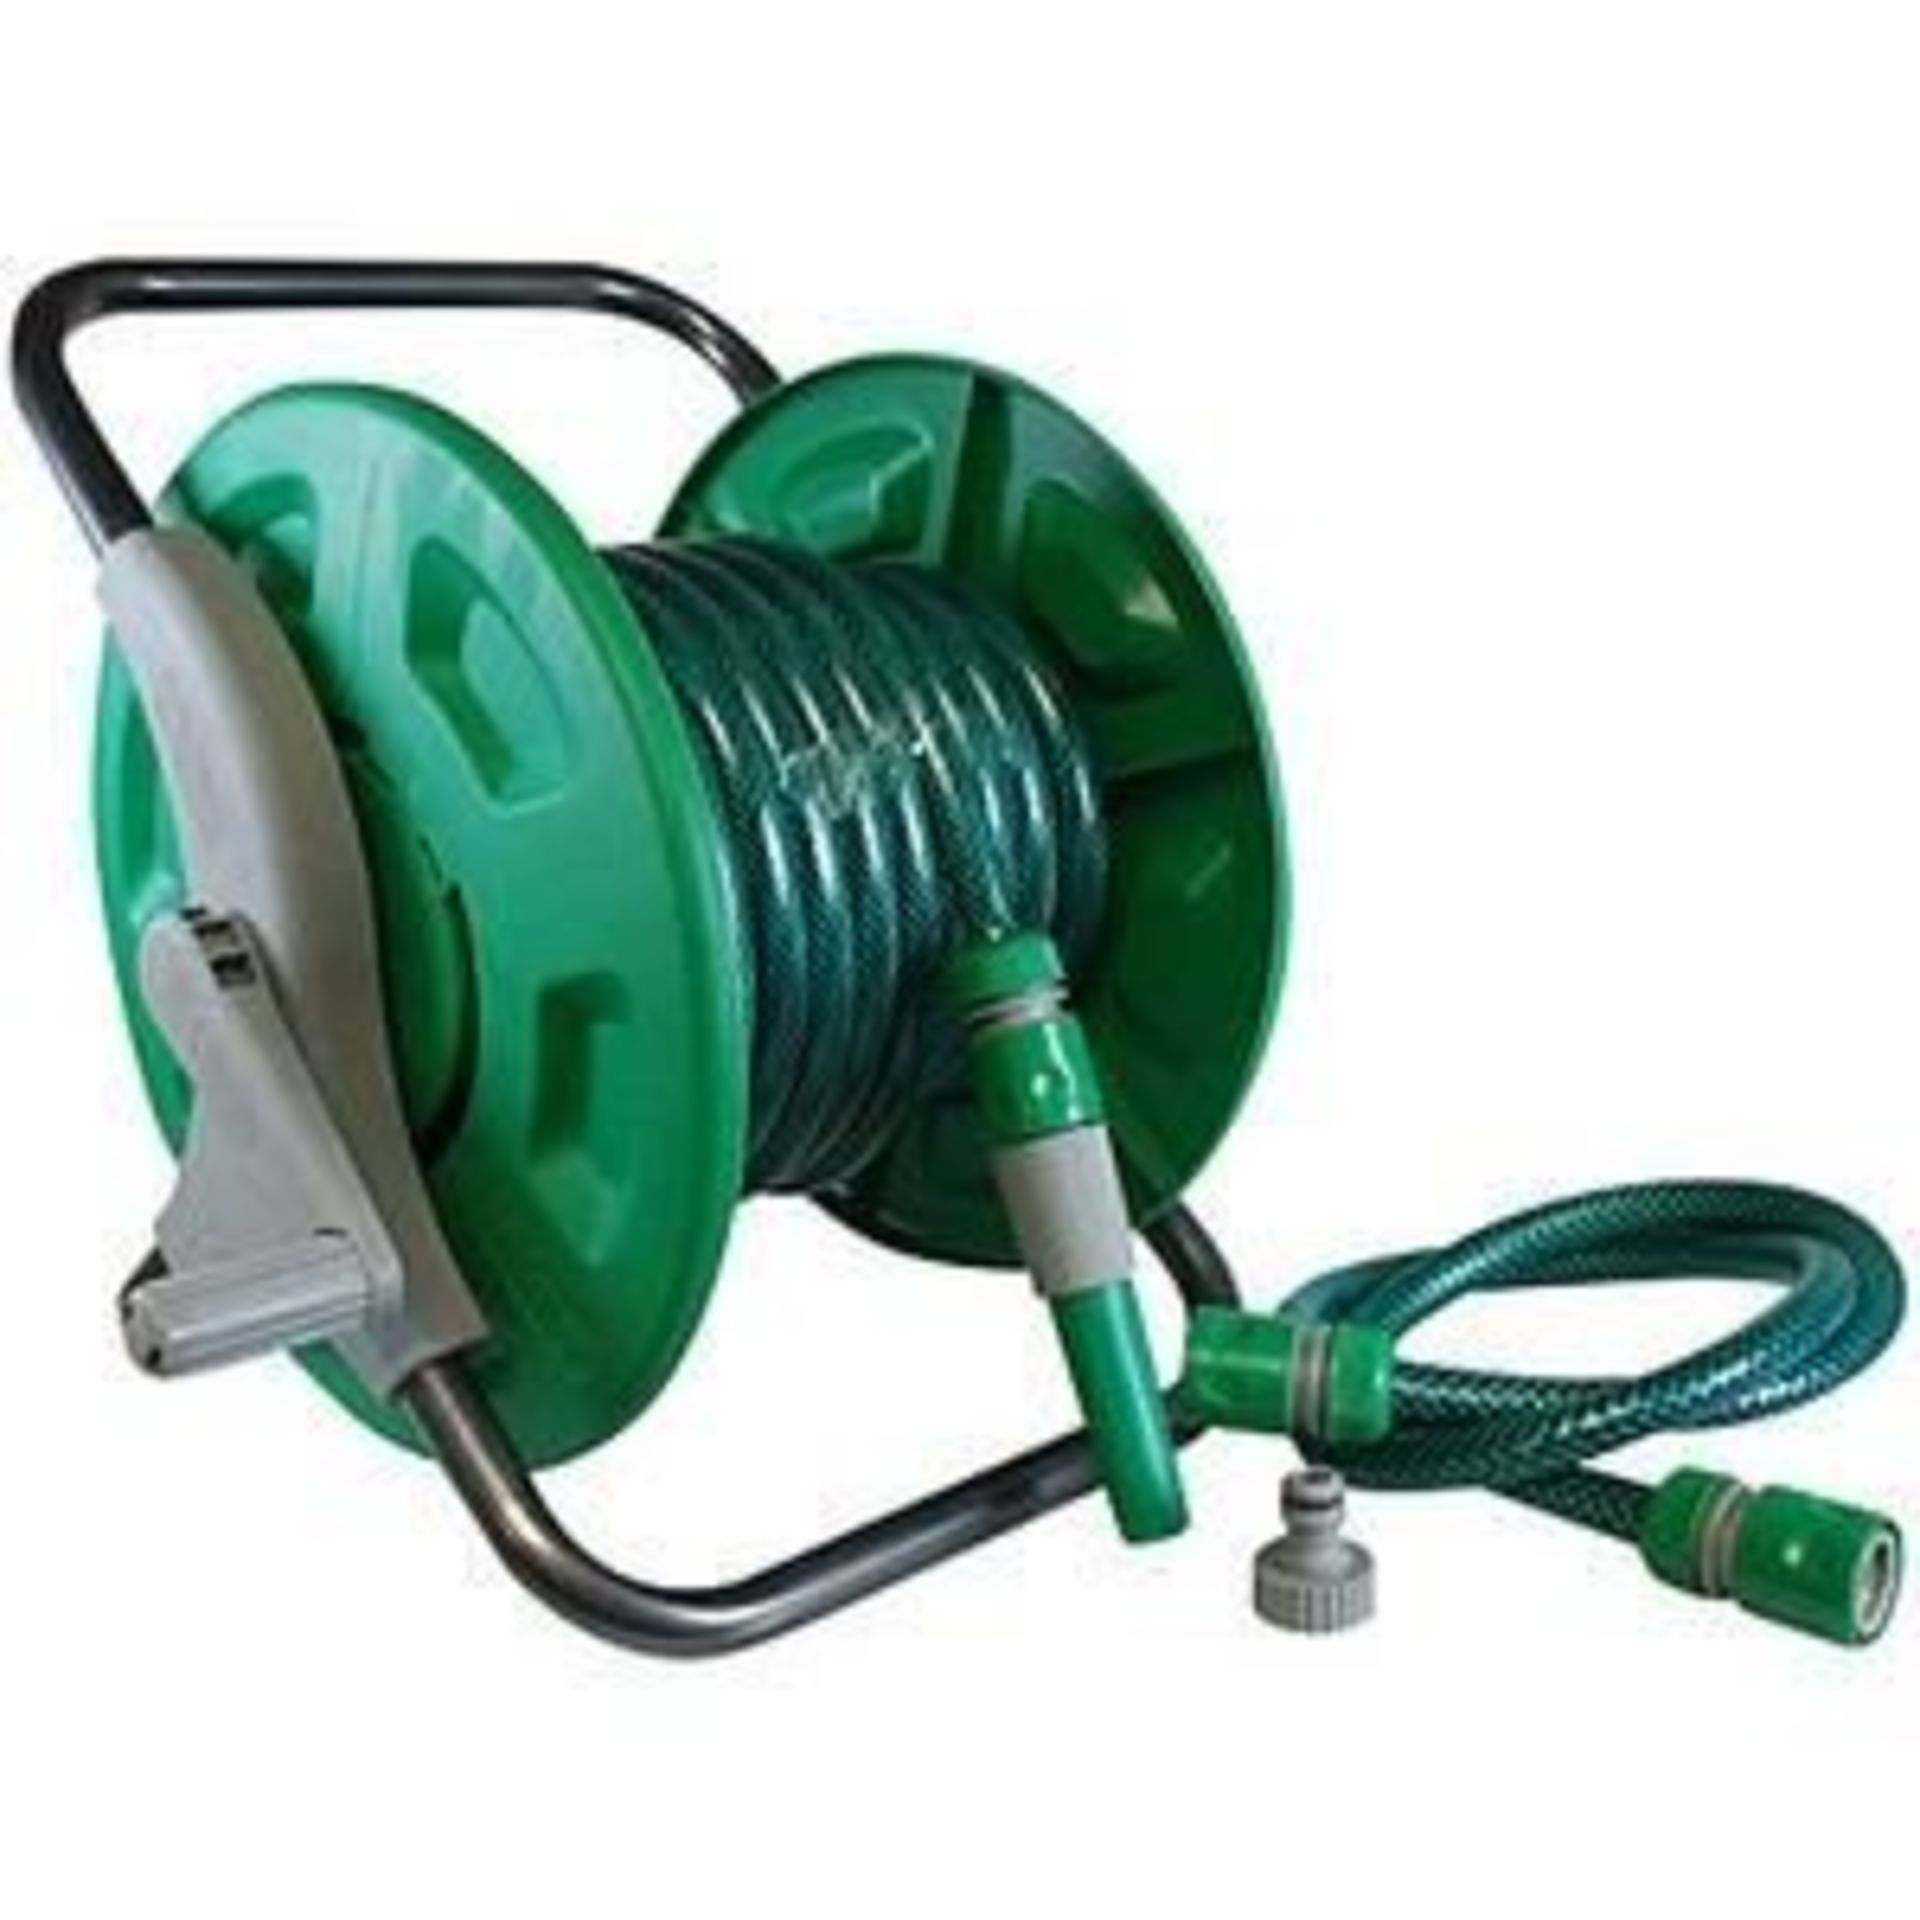 V *TRADE QTY* Brand New 15 Metre Hose Reel Set - £15.95 Amazon X 3 YOUR BID PRICE TO BE MULTIPLIED